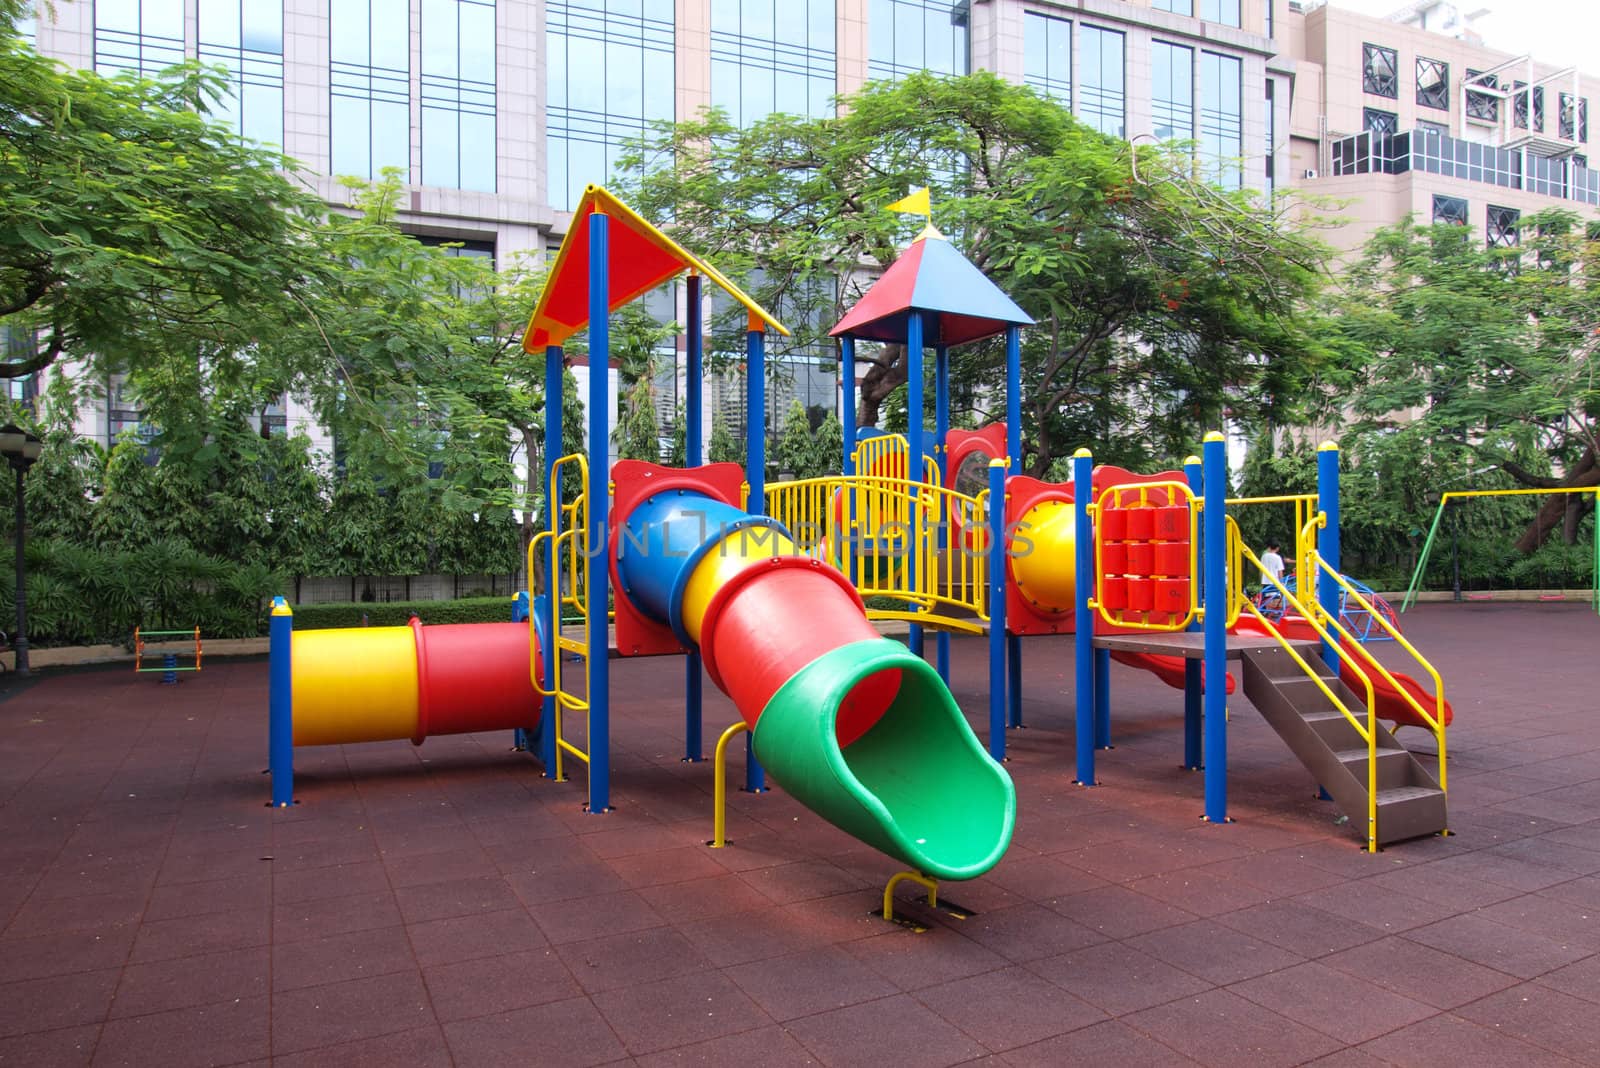 playground in a city park by jakgree